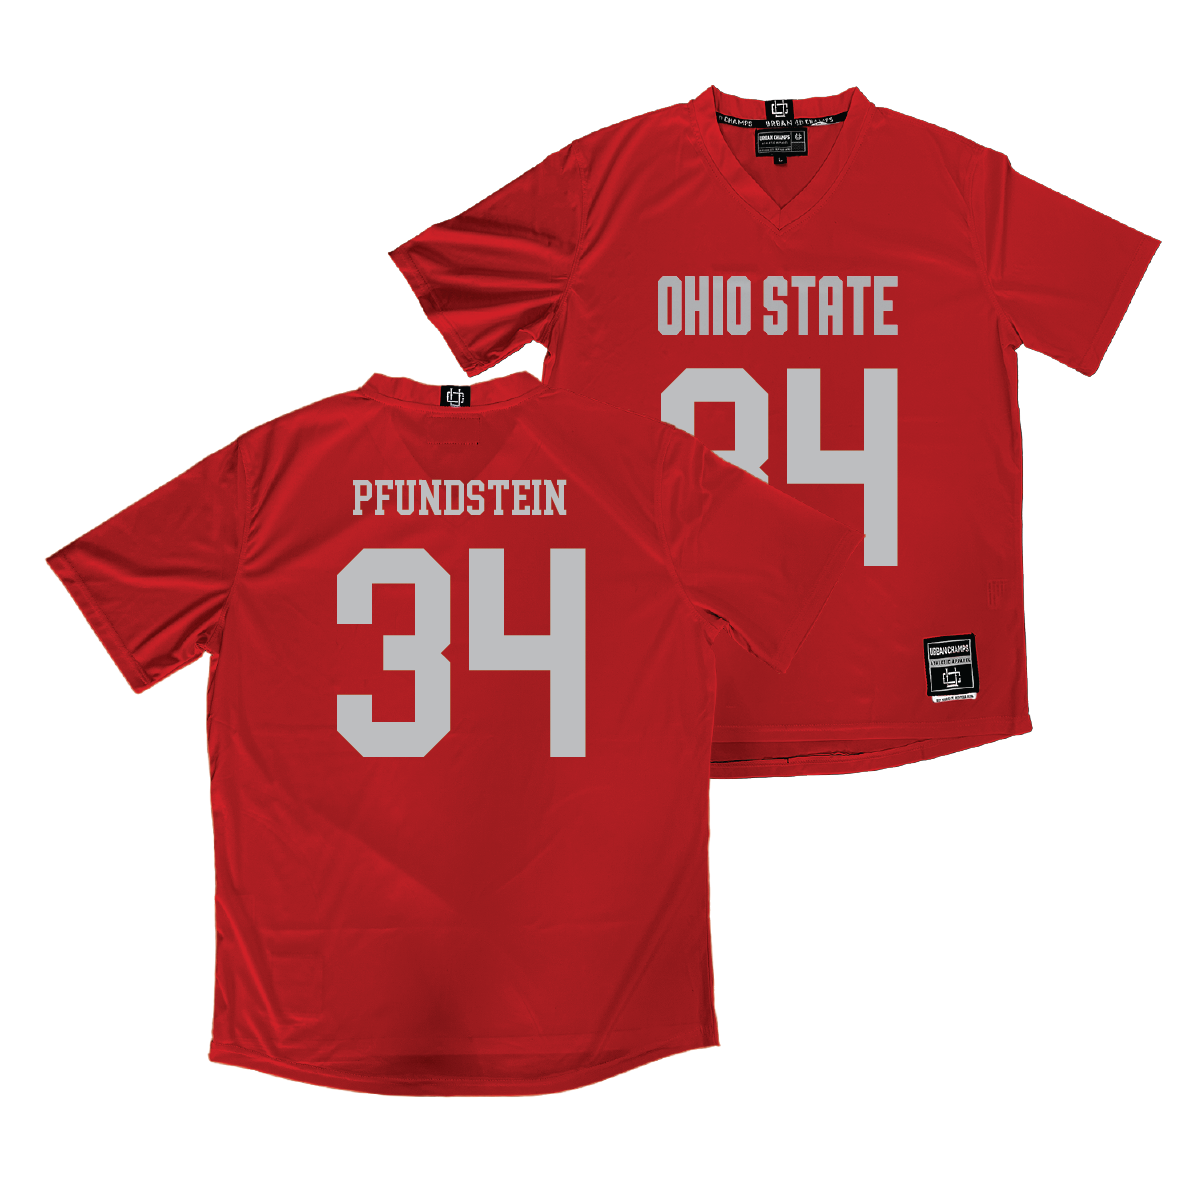 Ohio State Women's Lacrosse Red Jersey - Bryce Pfundstein | #34